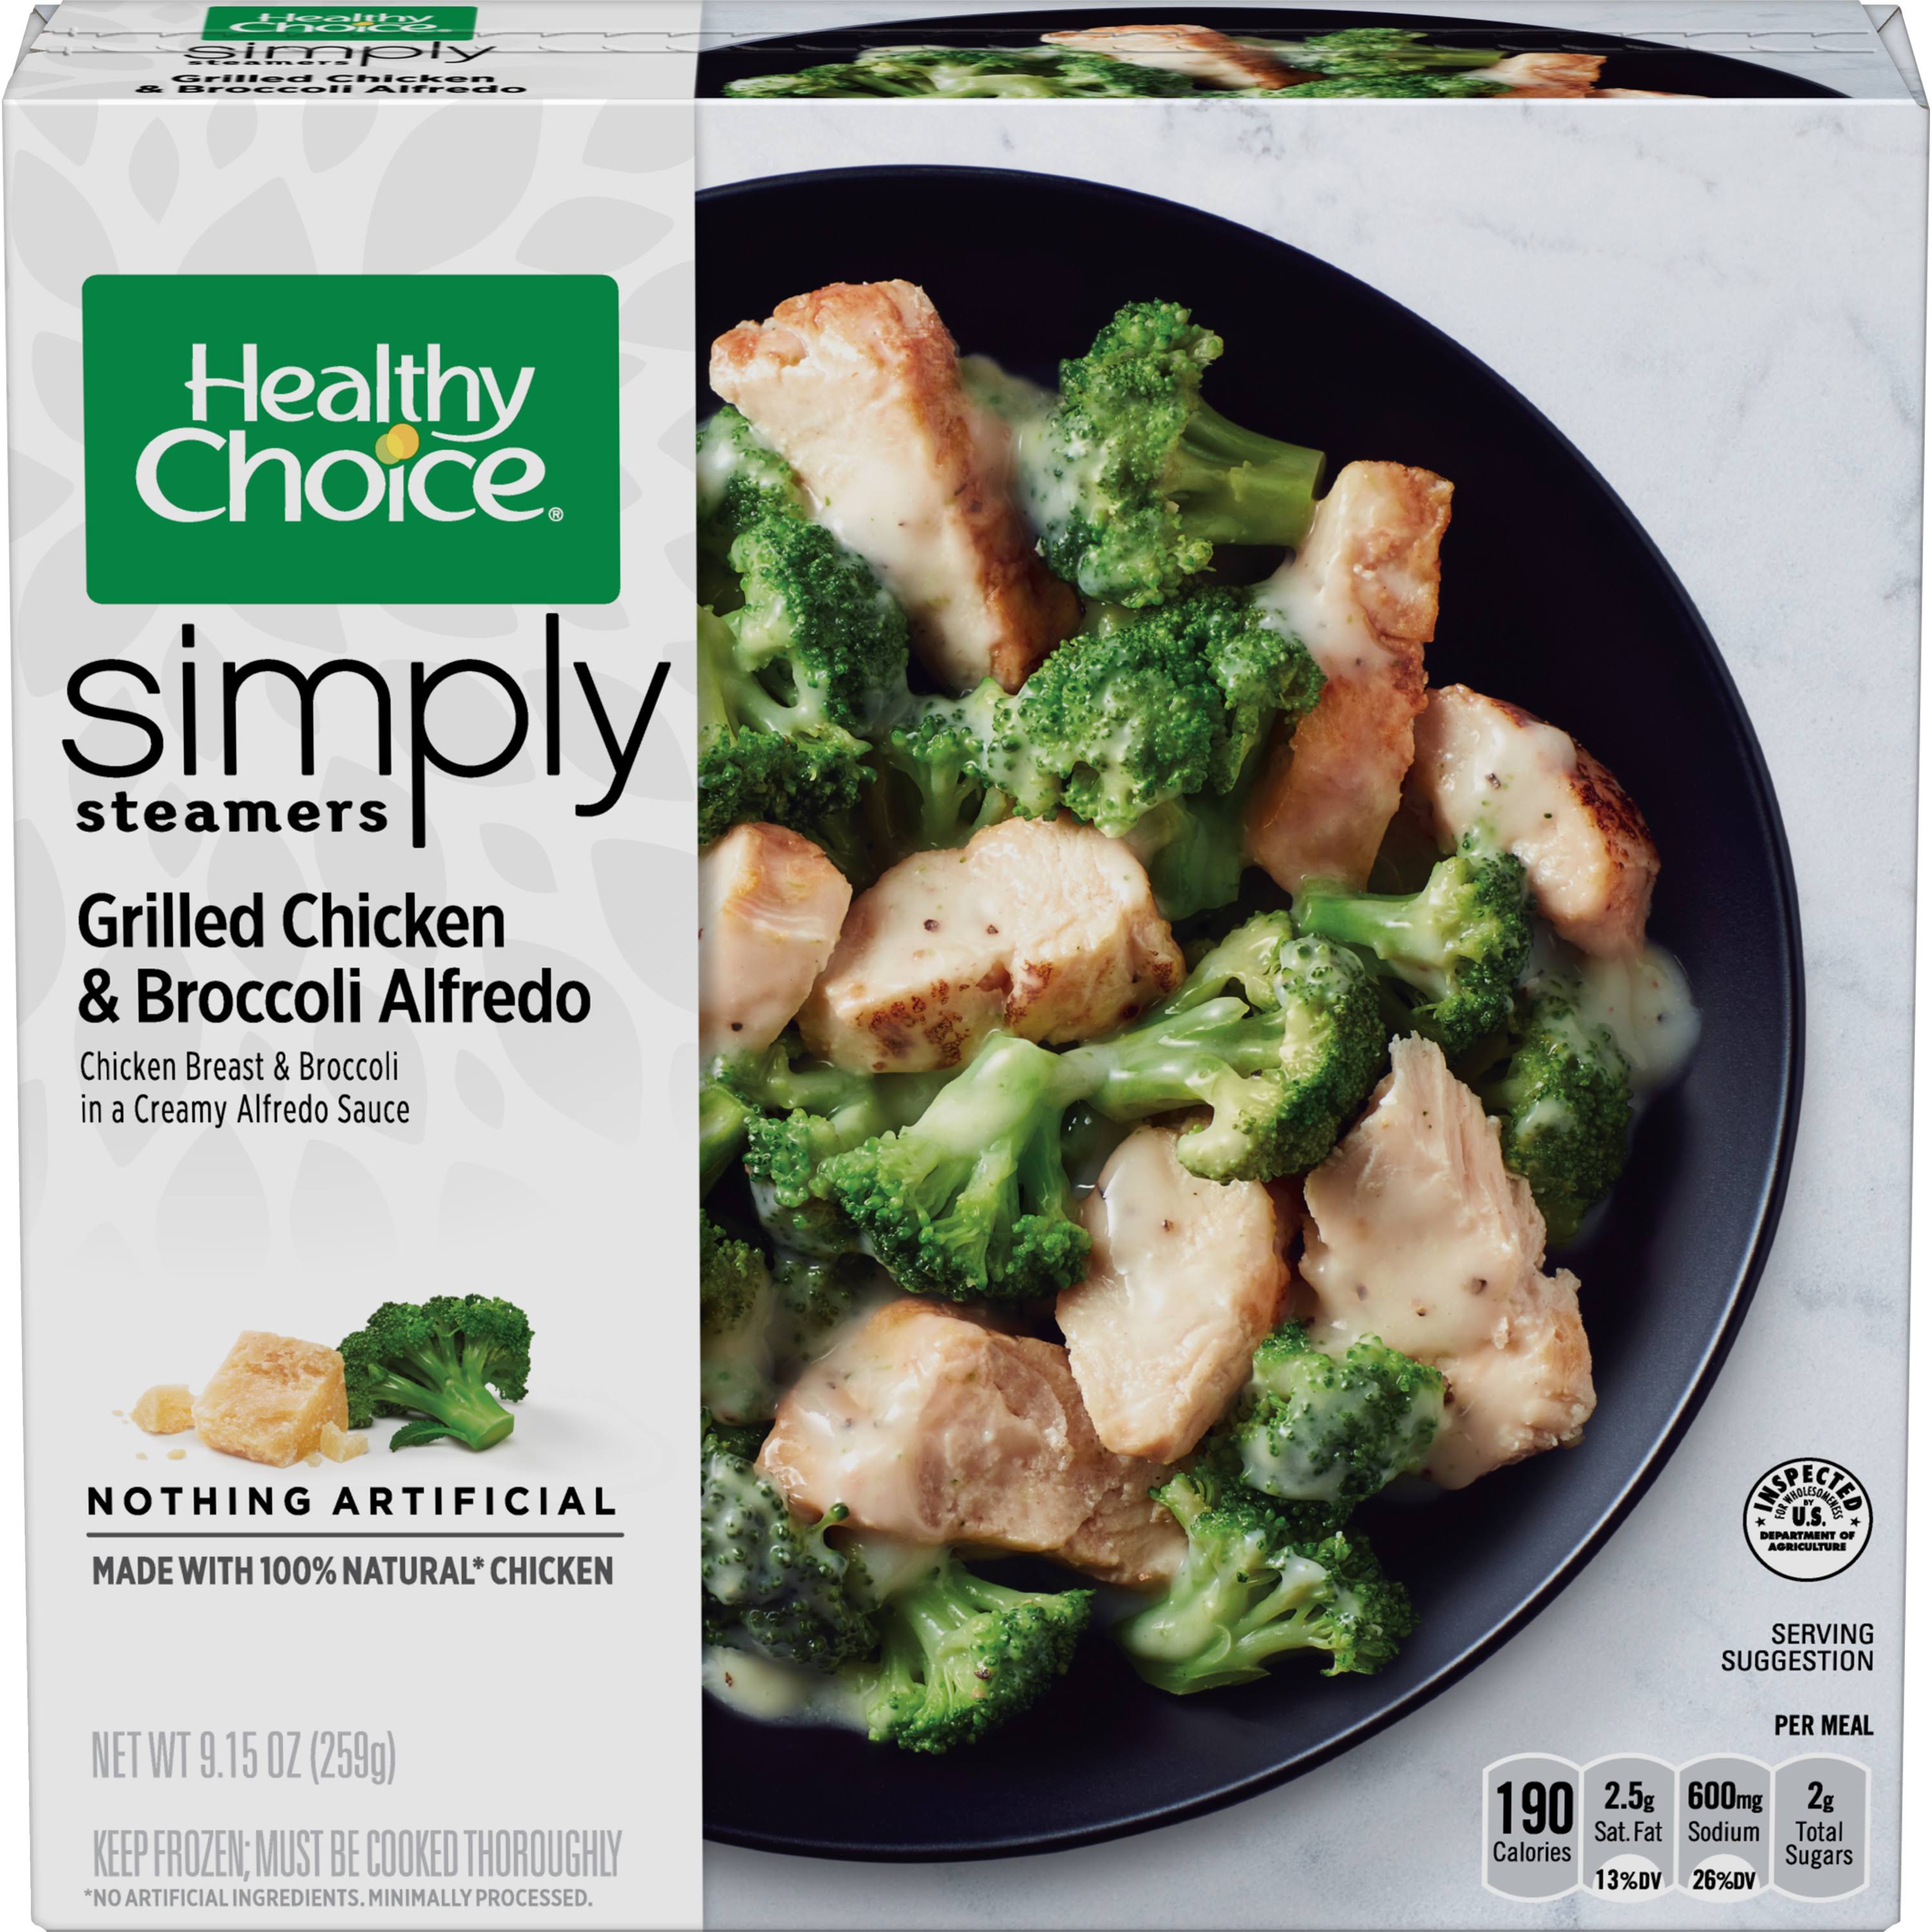 Healthy Choice Café Steamers Simply Grilled Chicken and Broccoli Alfredo Meal - 9.15oz